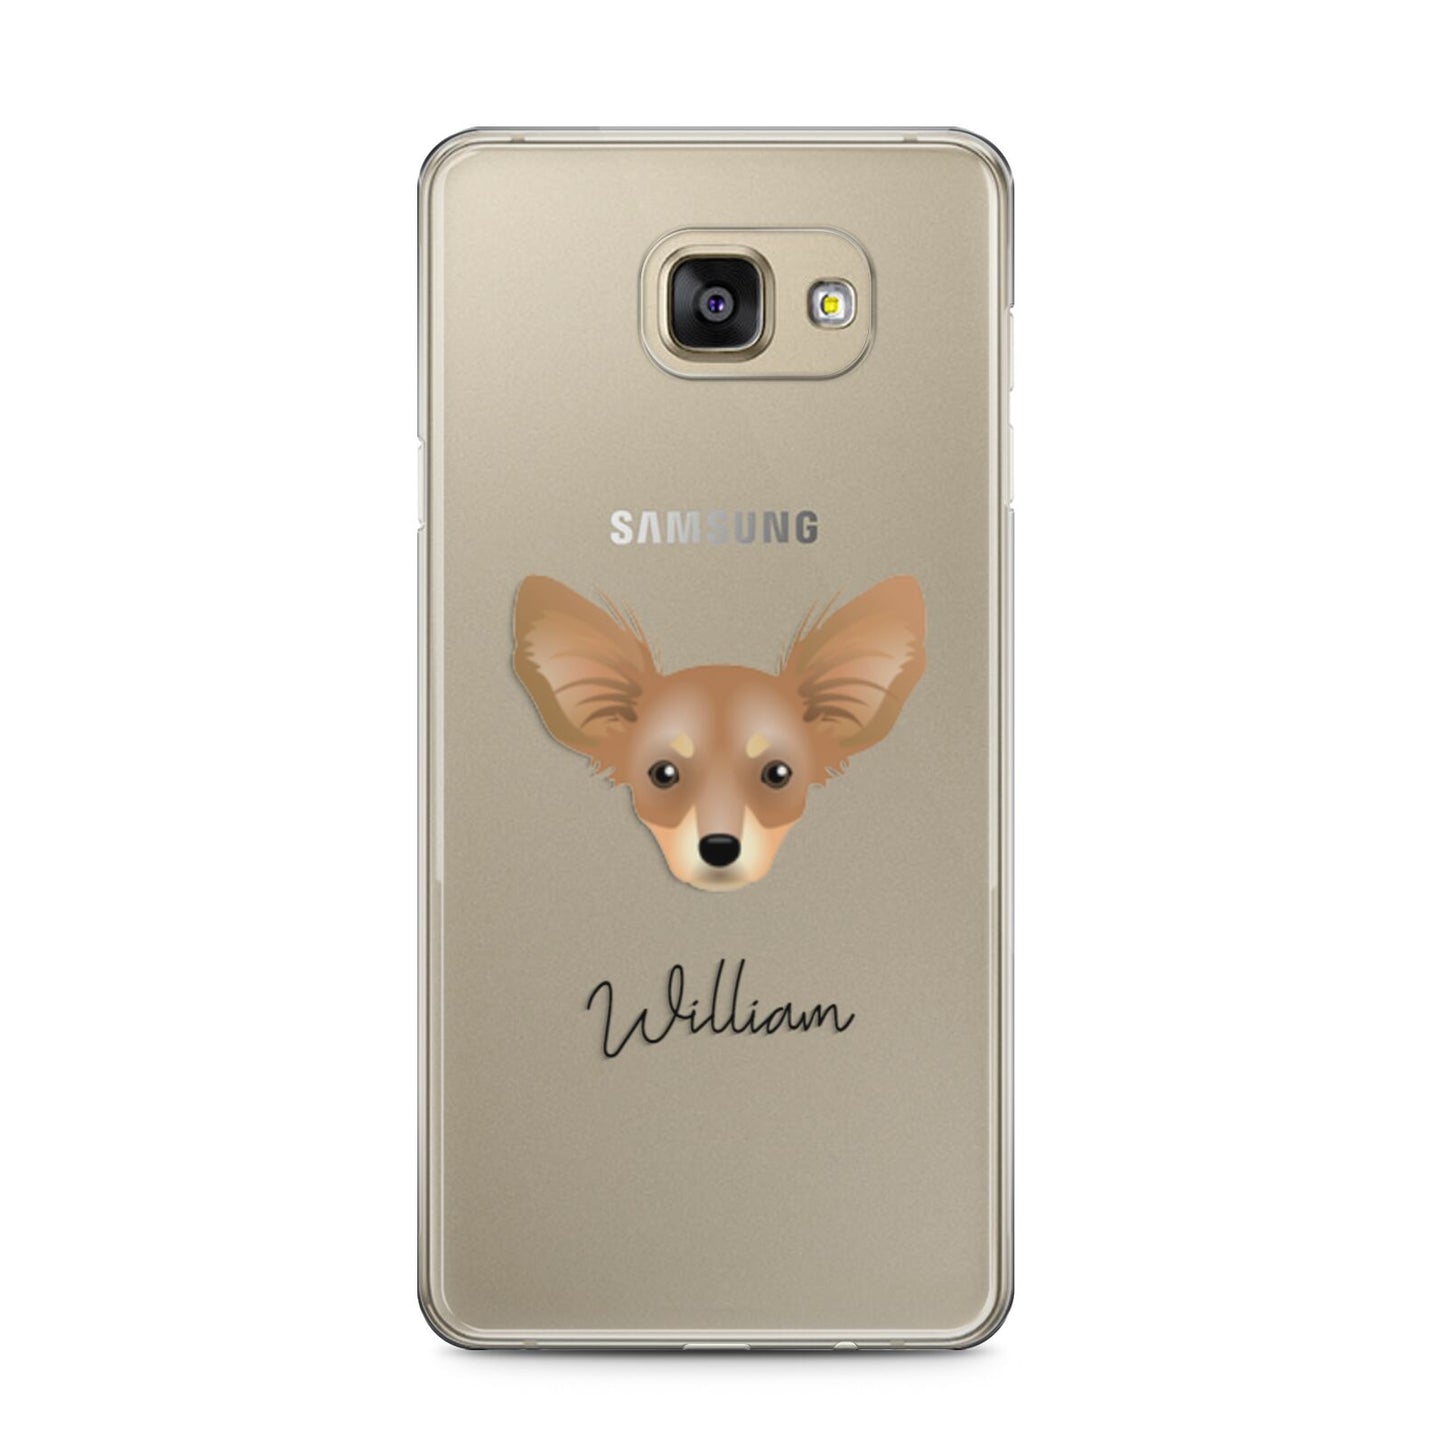 Russian Toy Personalised Samsung Galaxy A5 2016 Case on gold phone